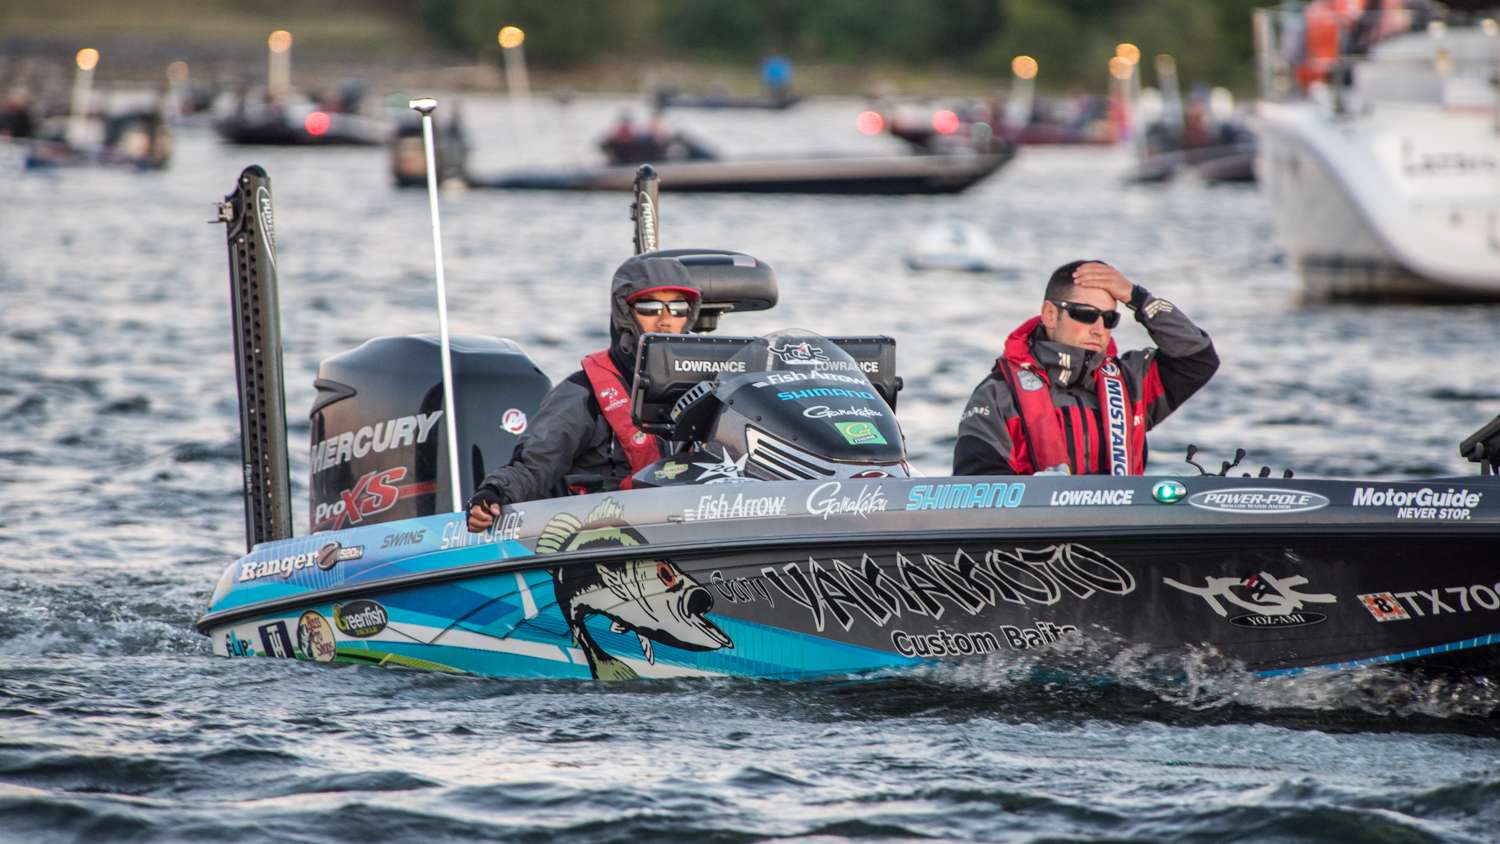 Shin has tasted victory on Champlain before and although the lake is setting up a bit differently this time, Shin will be hunting for another win. 